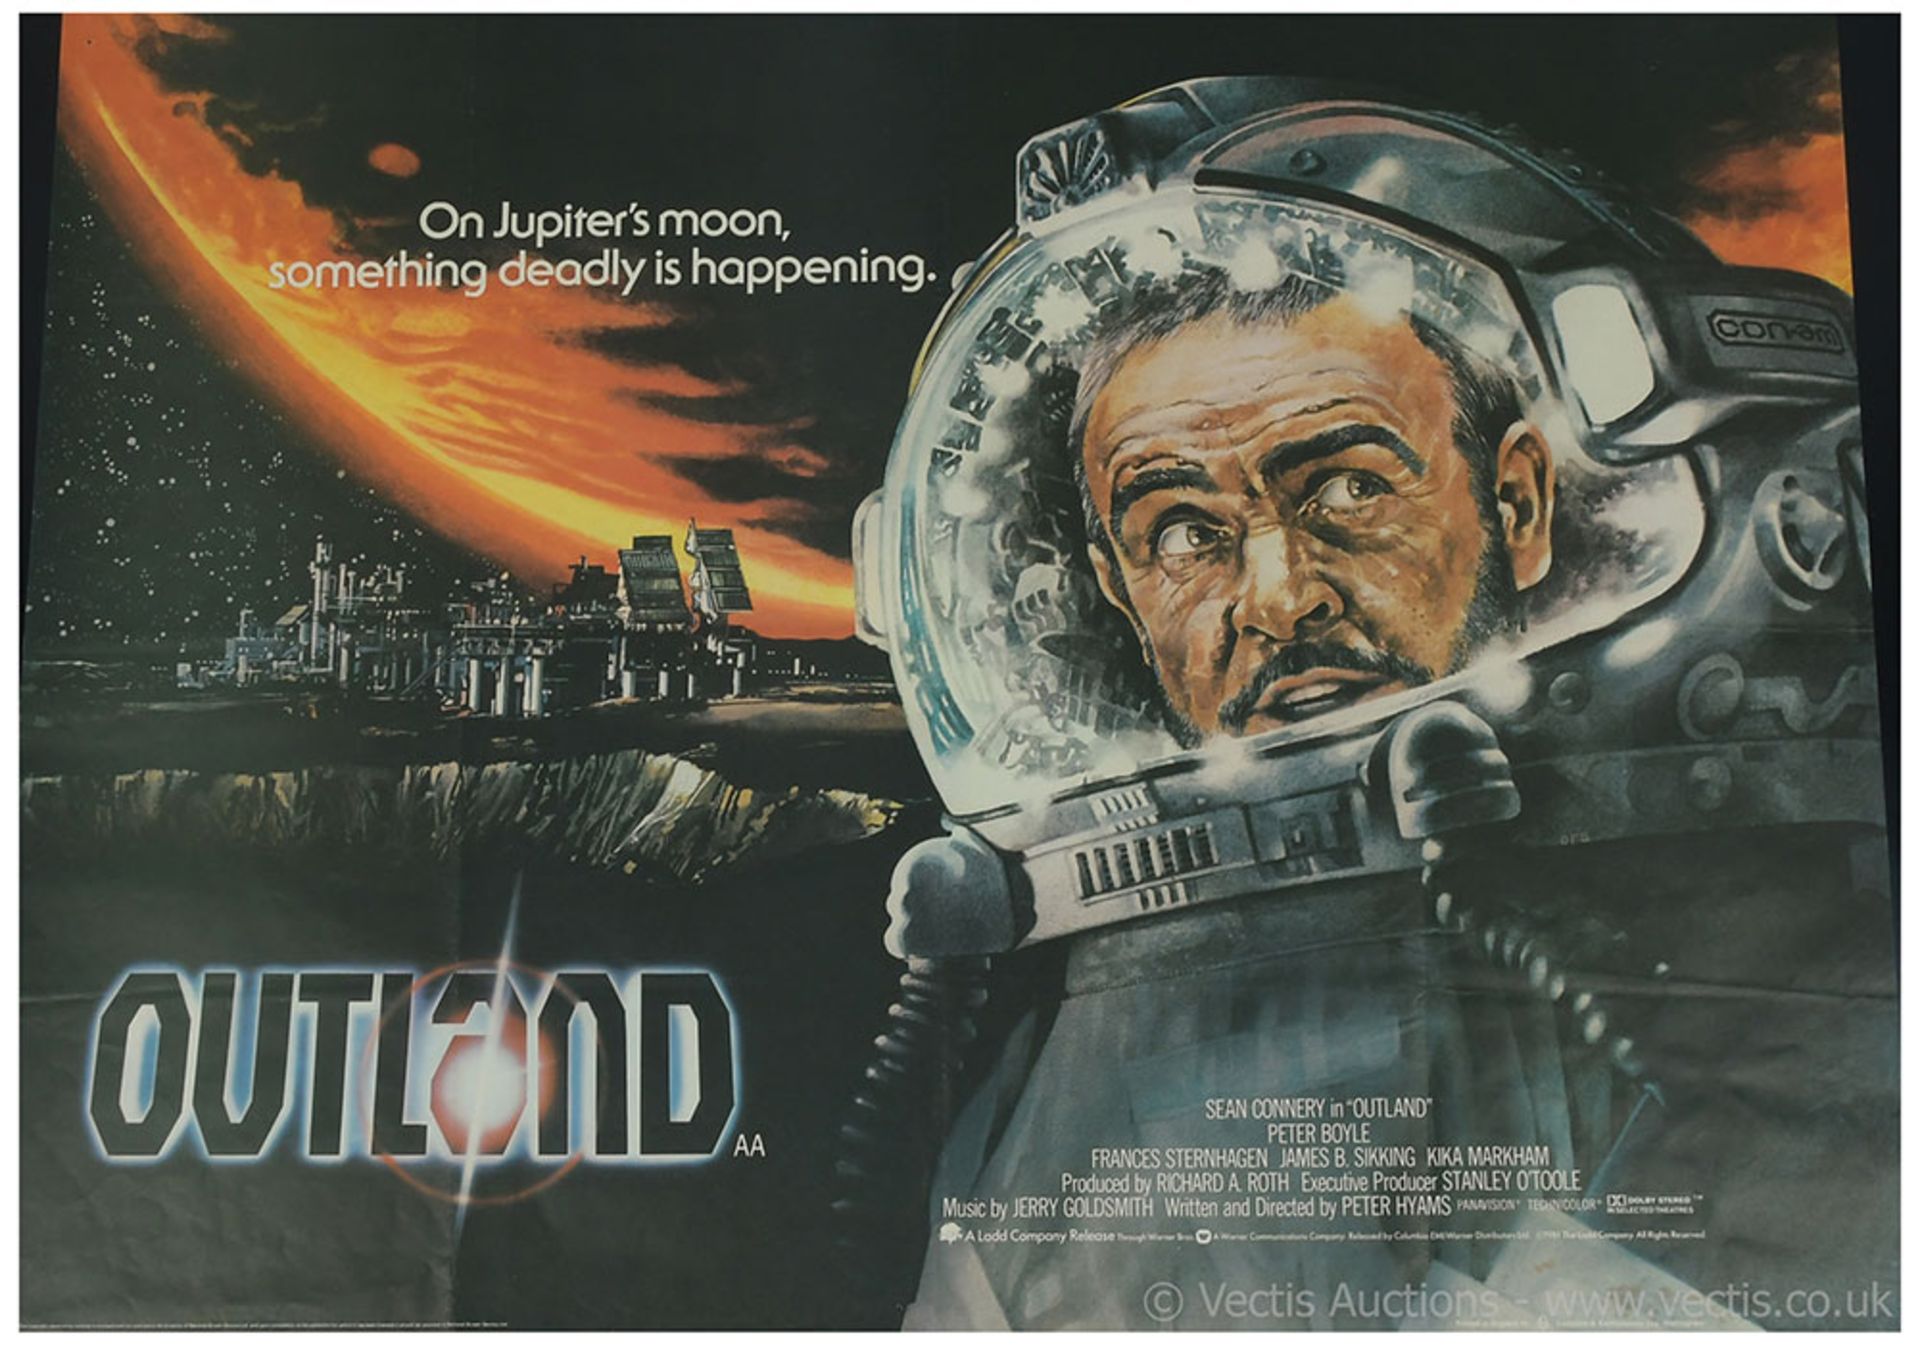 Outland 1981 British Quad poster, has been